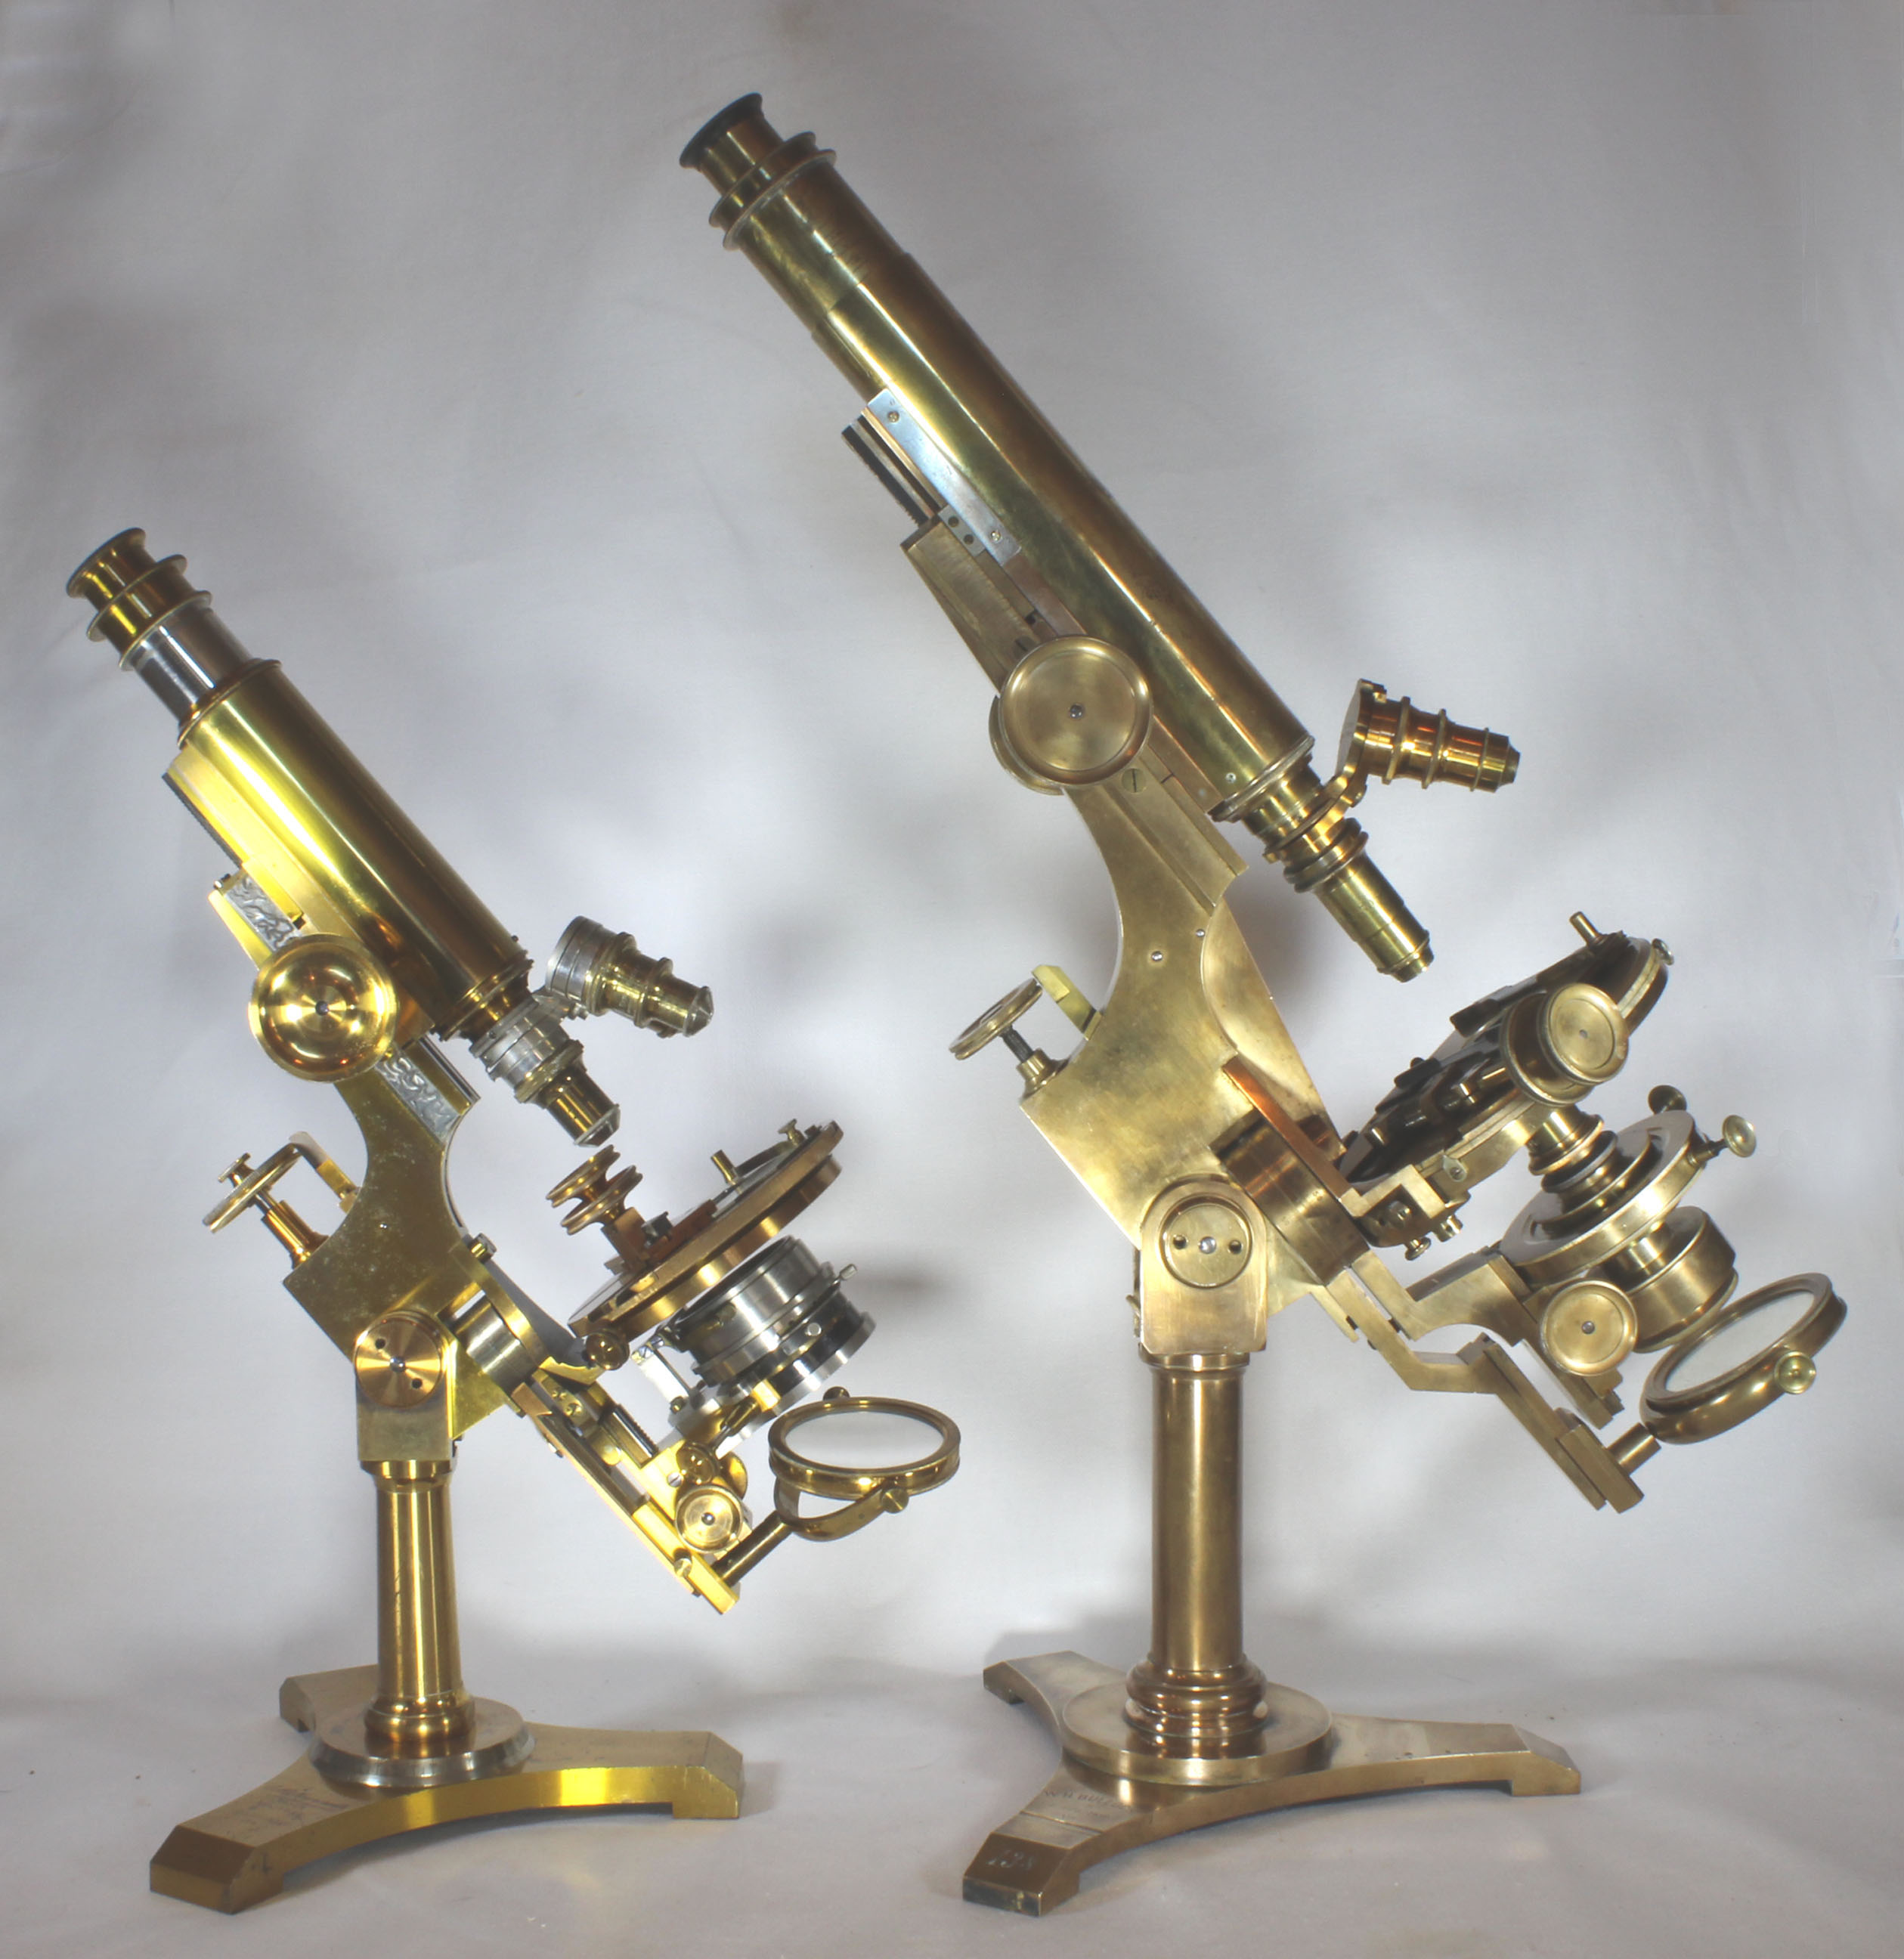 Bulloch Biological and Professional Microscopes side by side